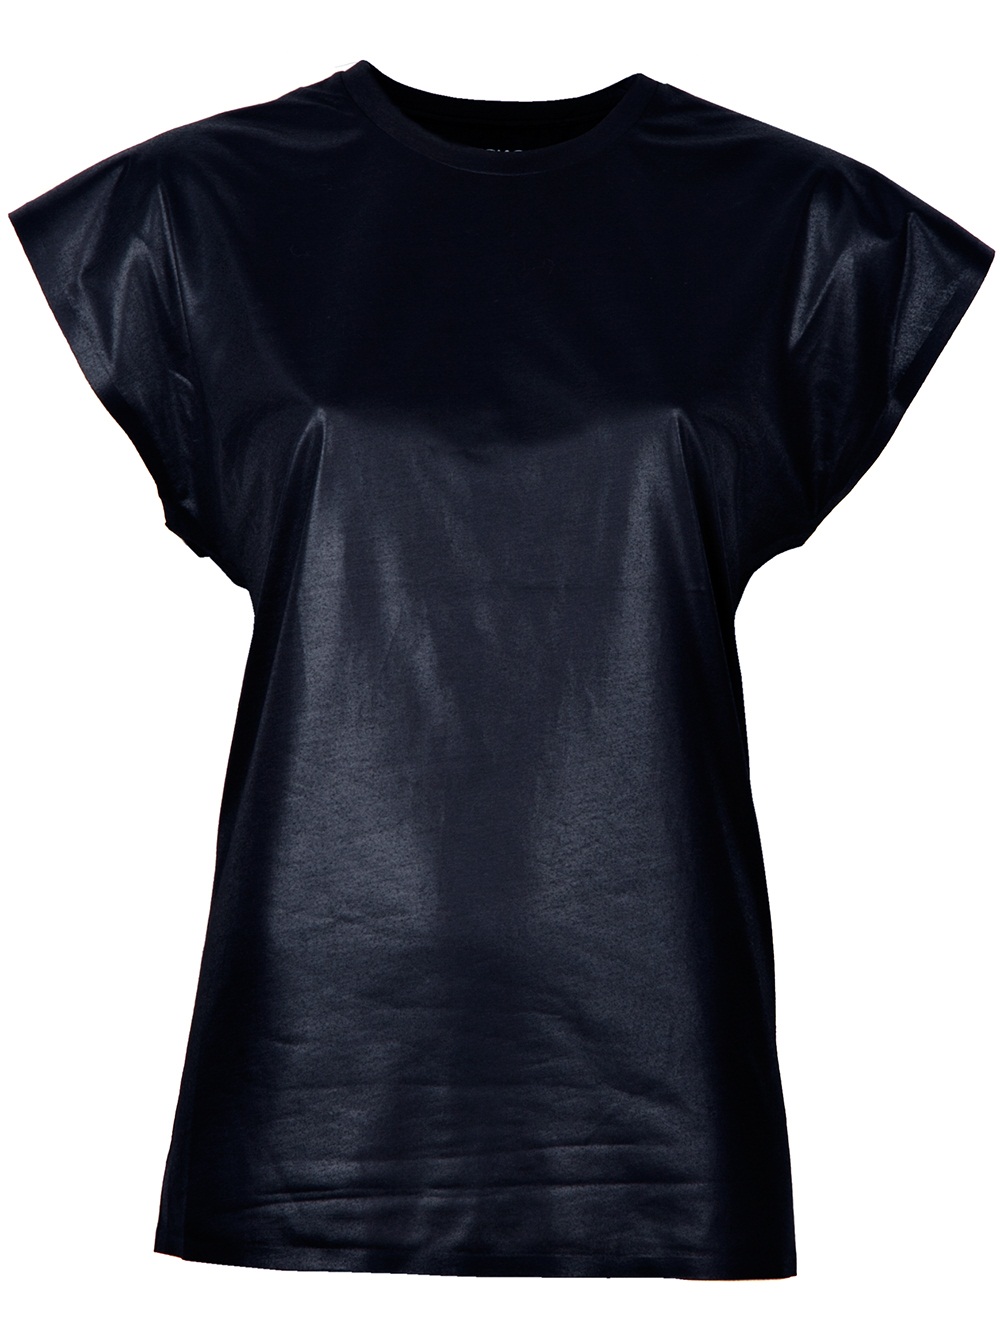 Shallow Obsessions About Fashion: Leather tshirt - would you wear one?